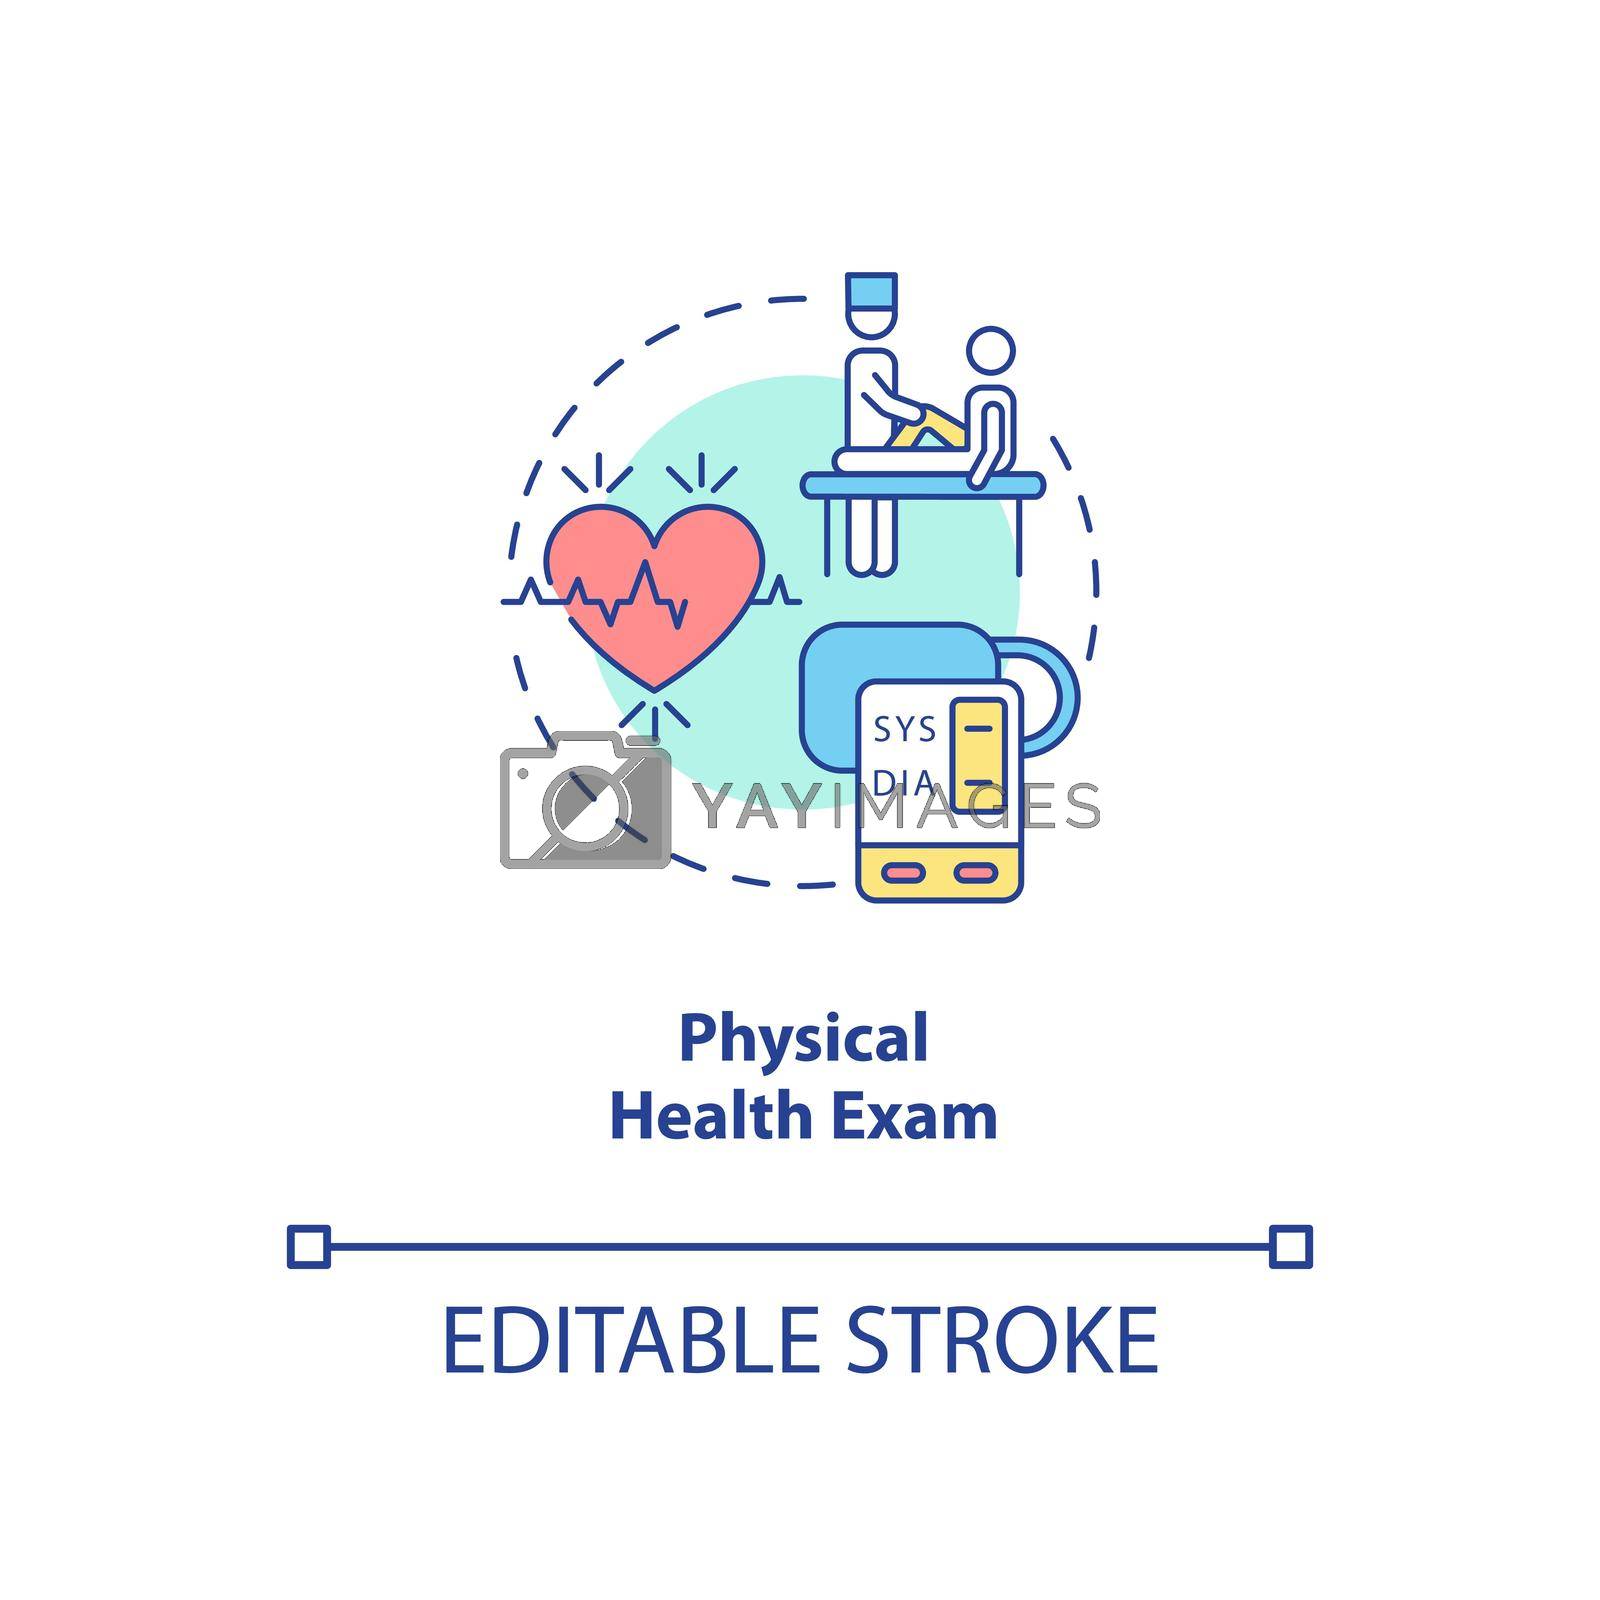 Royalty free image of Physical health exam concept icon by bsd